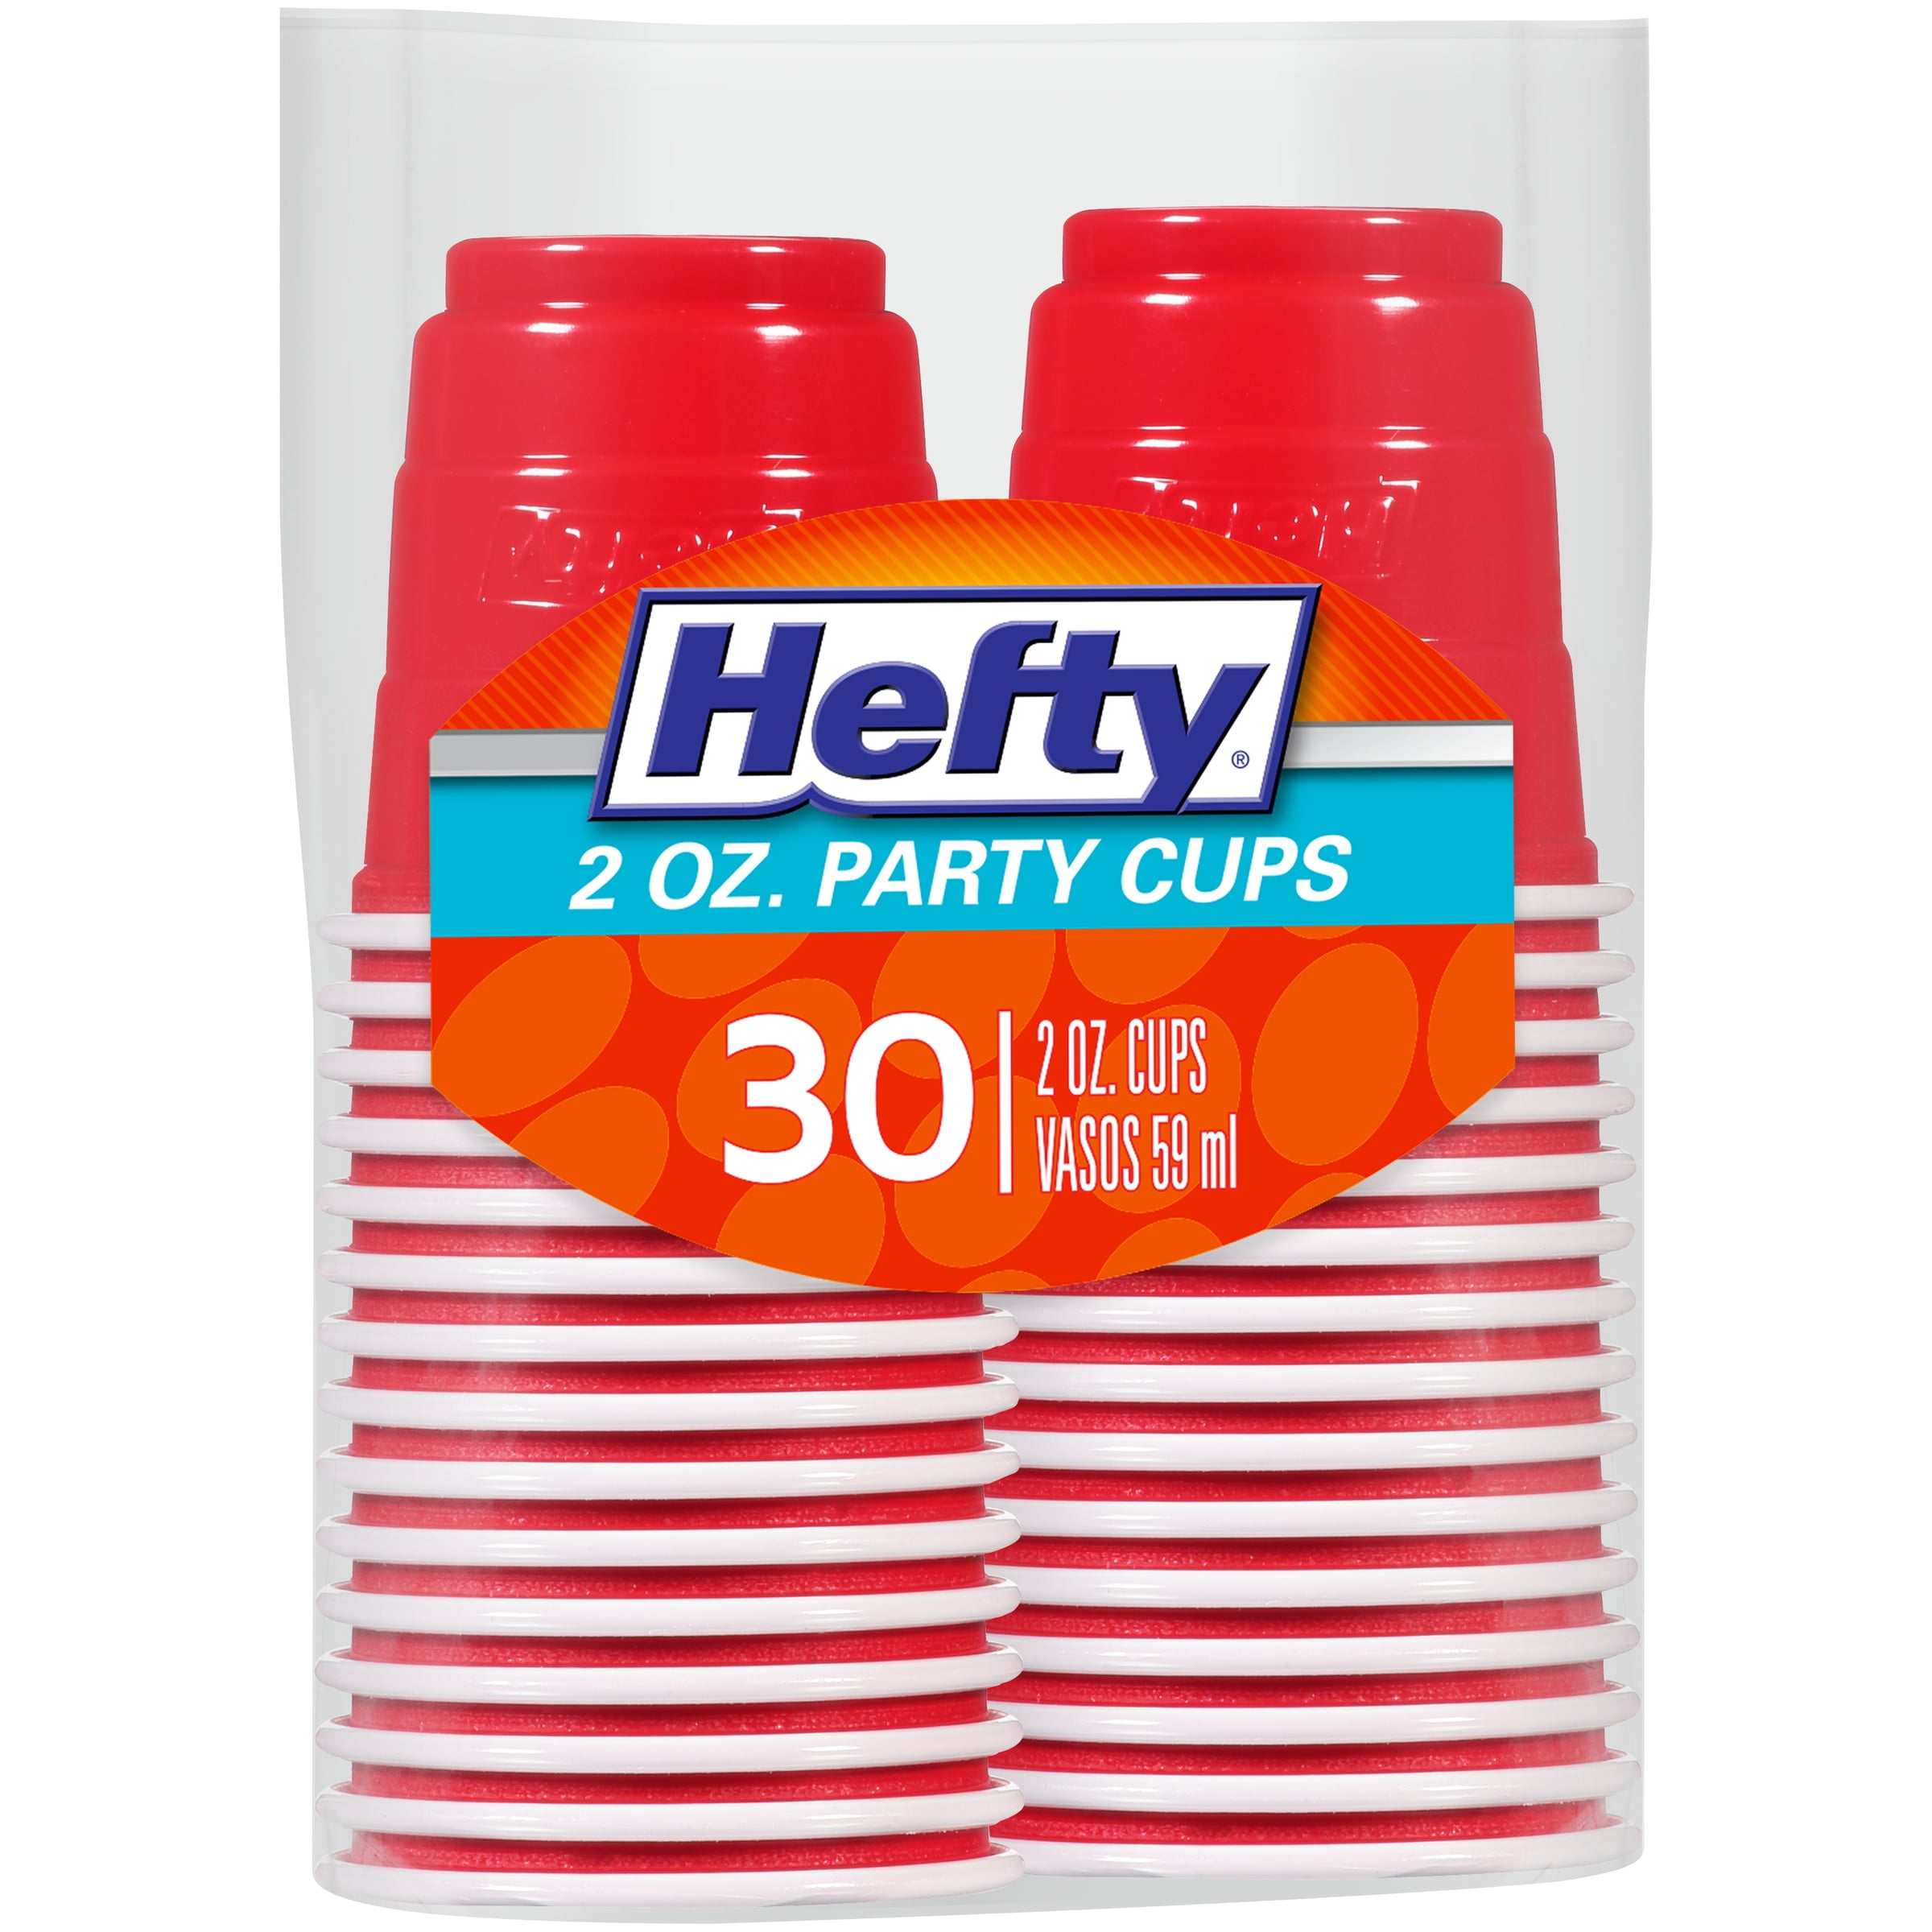 Hefty Red Plastic Party Cups 2 Ounce 30 Count